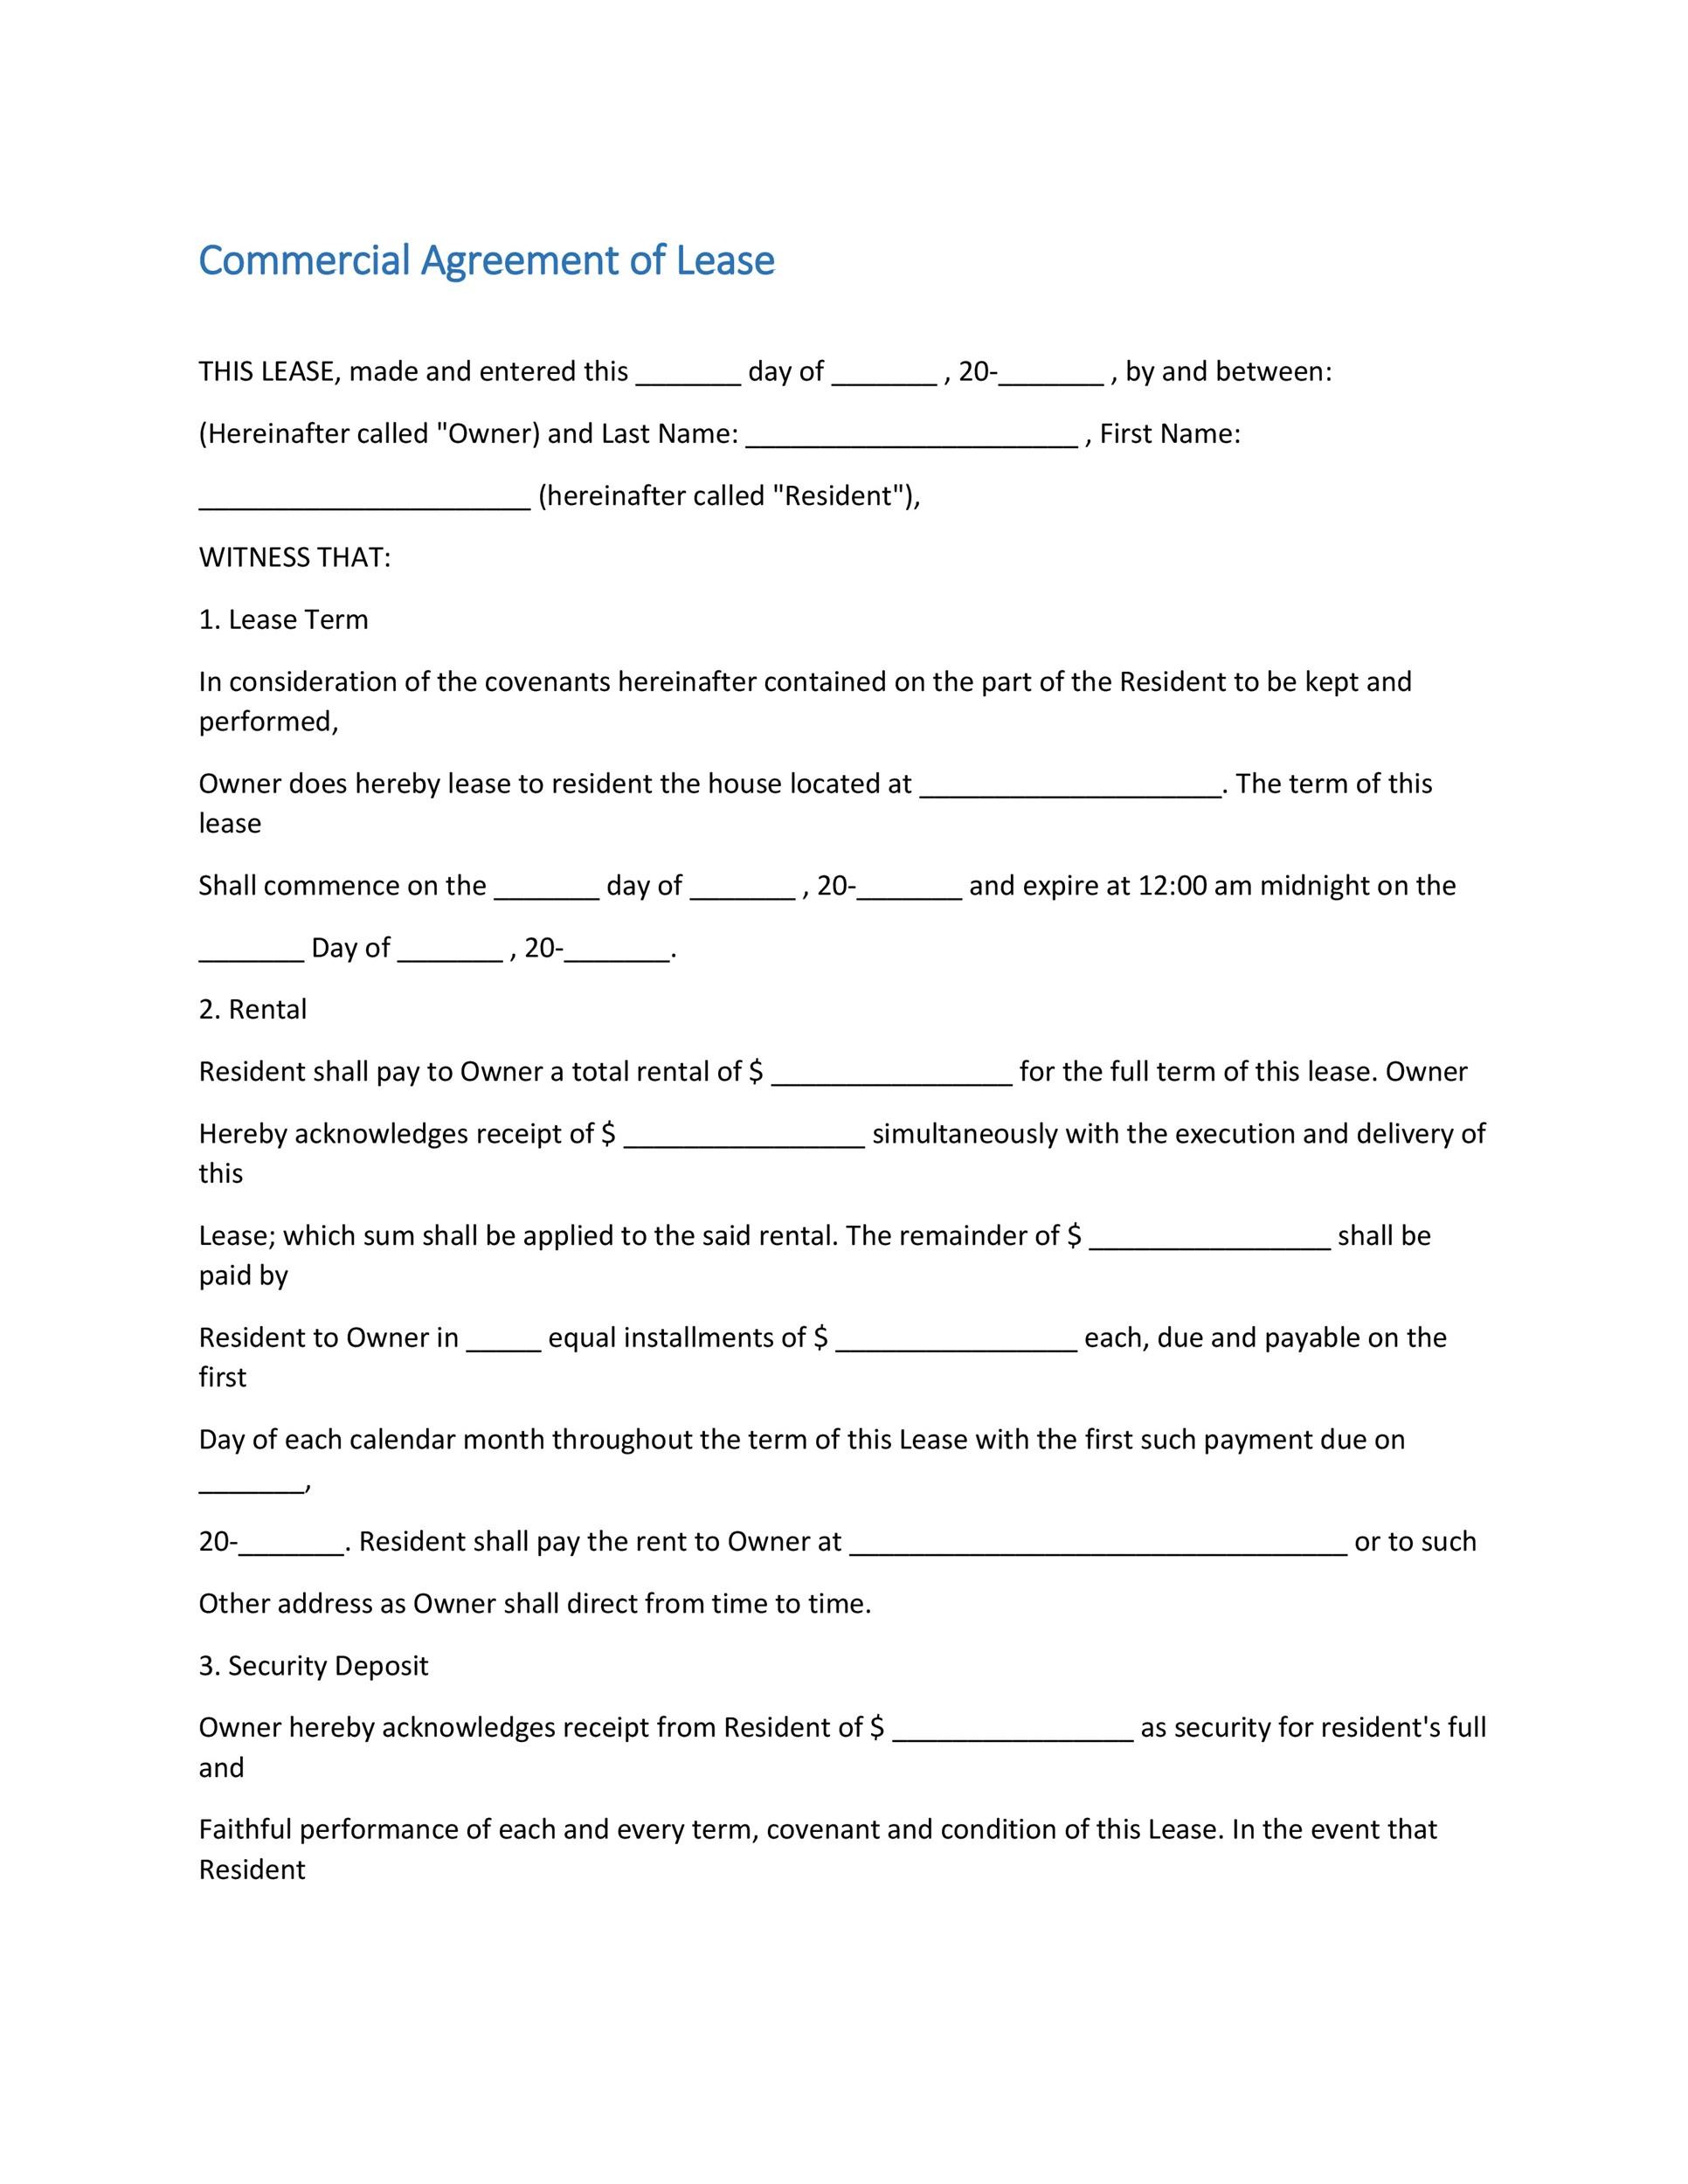 27 Free Commercial Lease Agreement Templates TemplateLab